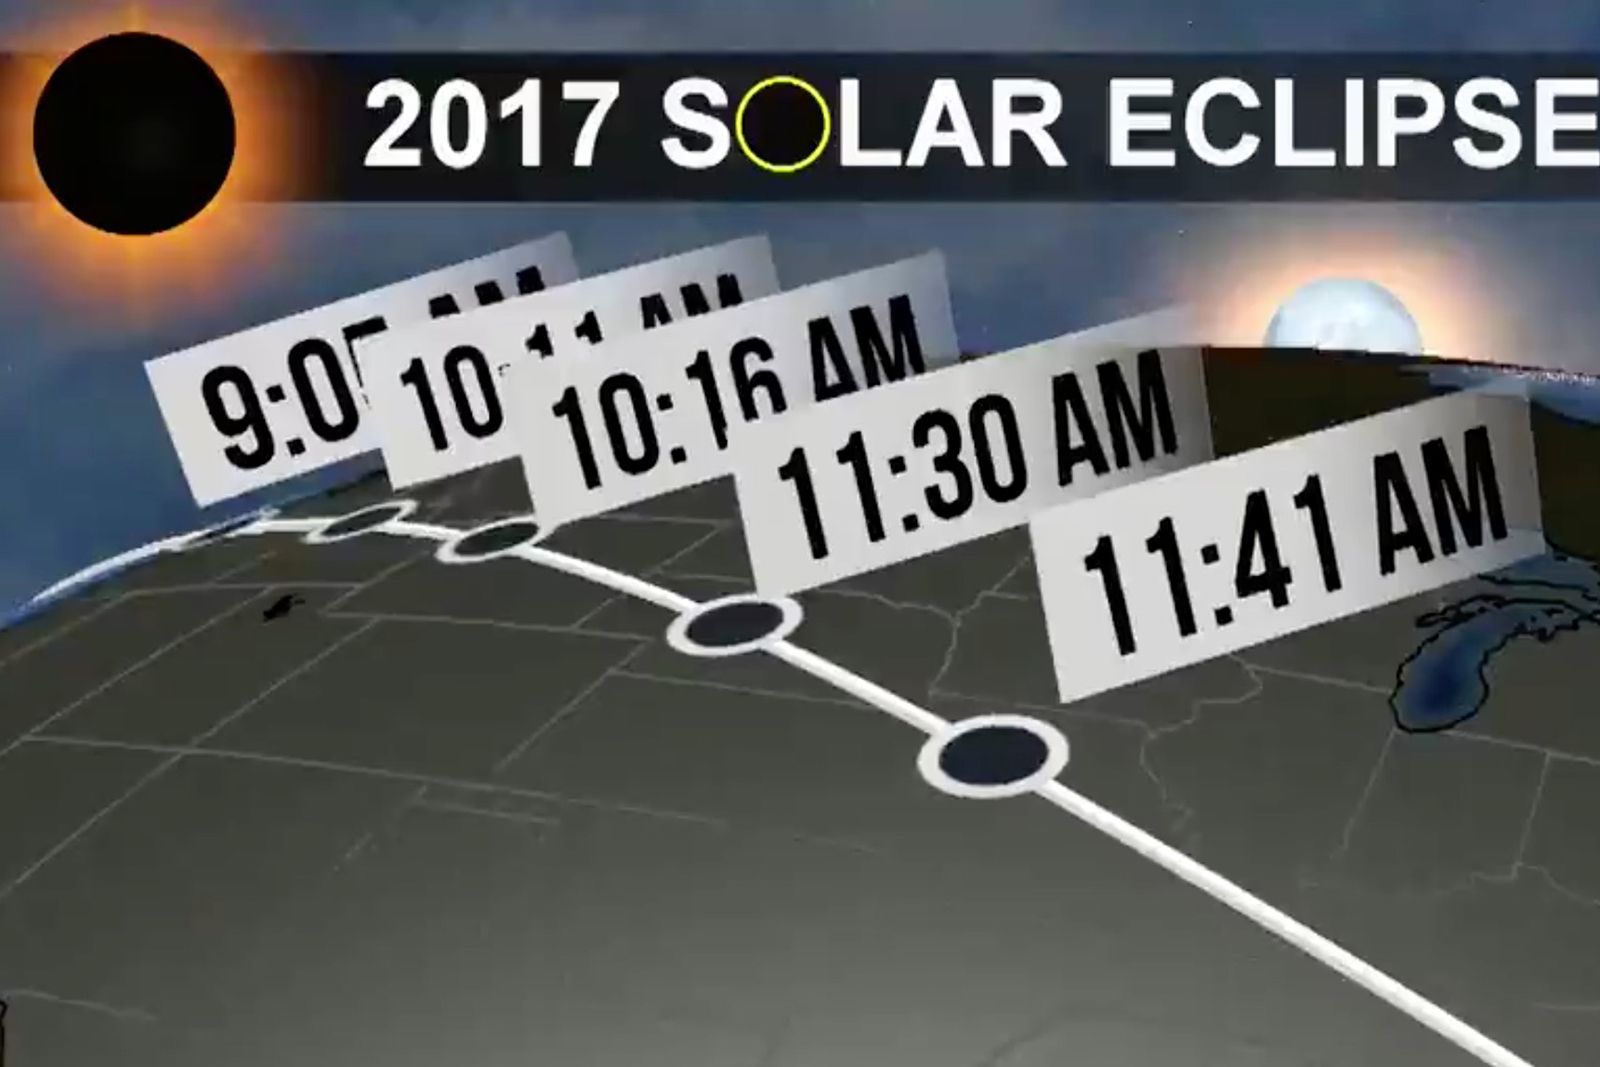 Twitter is live-streaming the solar eclipse so anyone can see it image 1